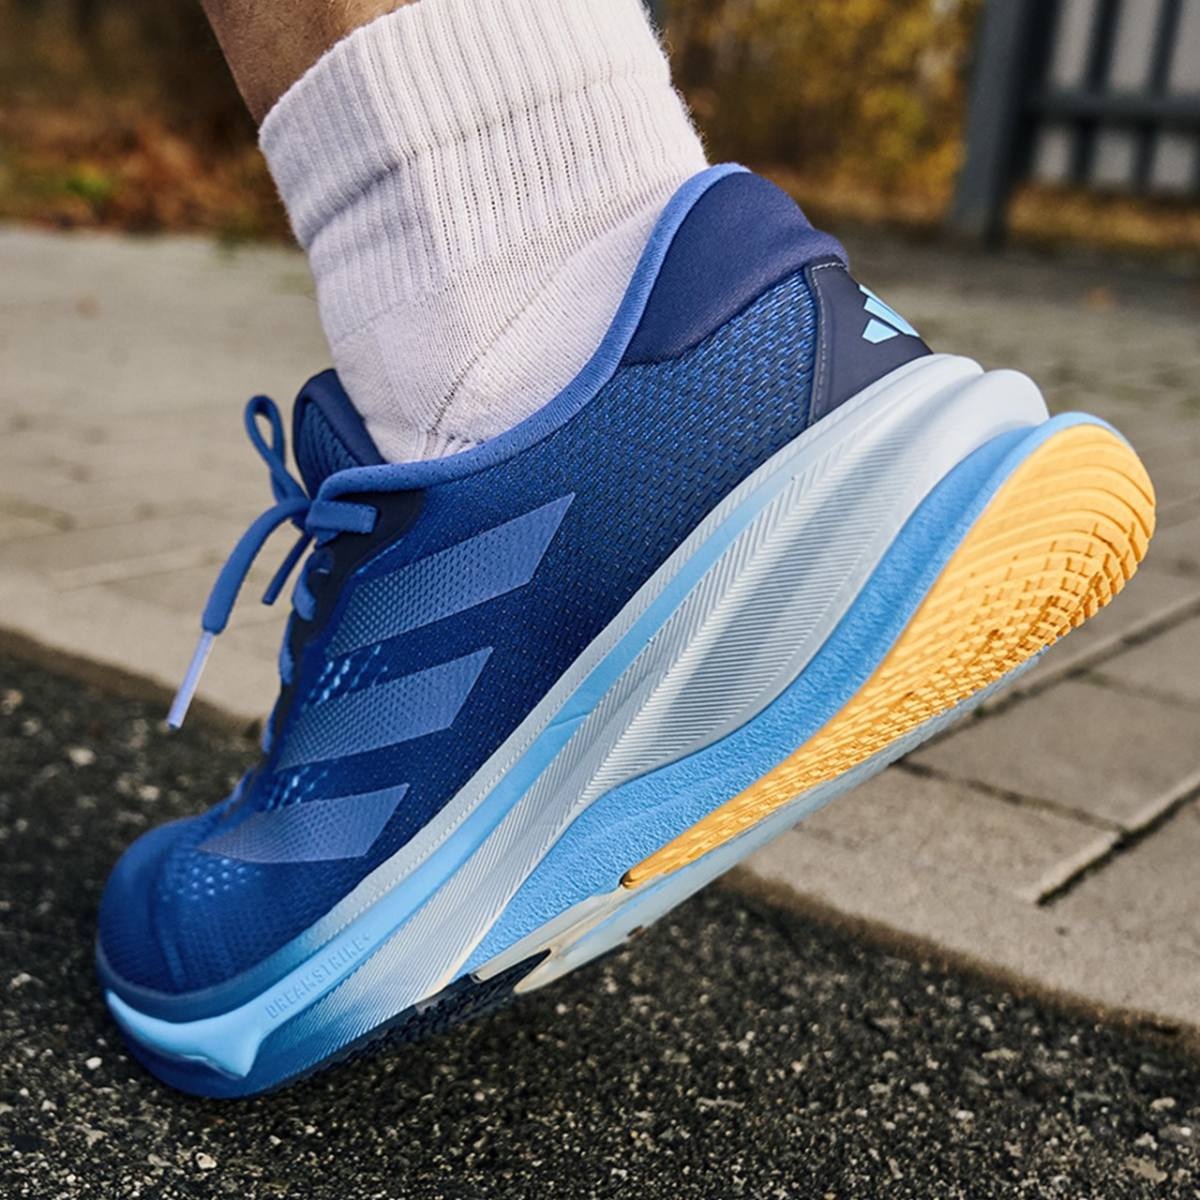 Adidas wants to get closer to the most popular runner with these 3 new shoes from the Supernova line